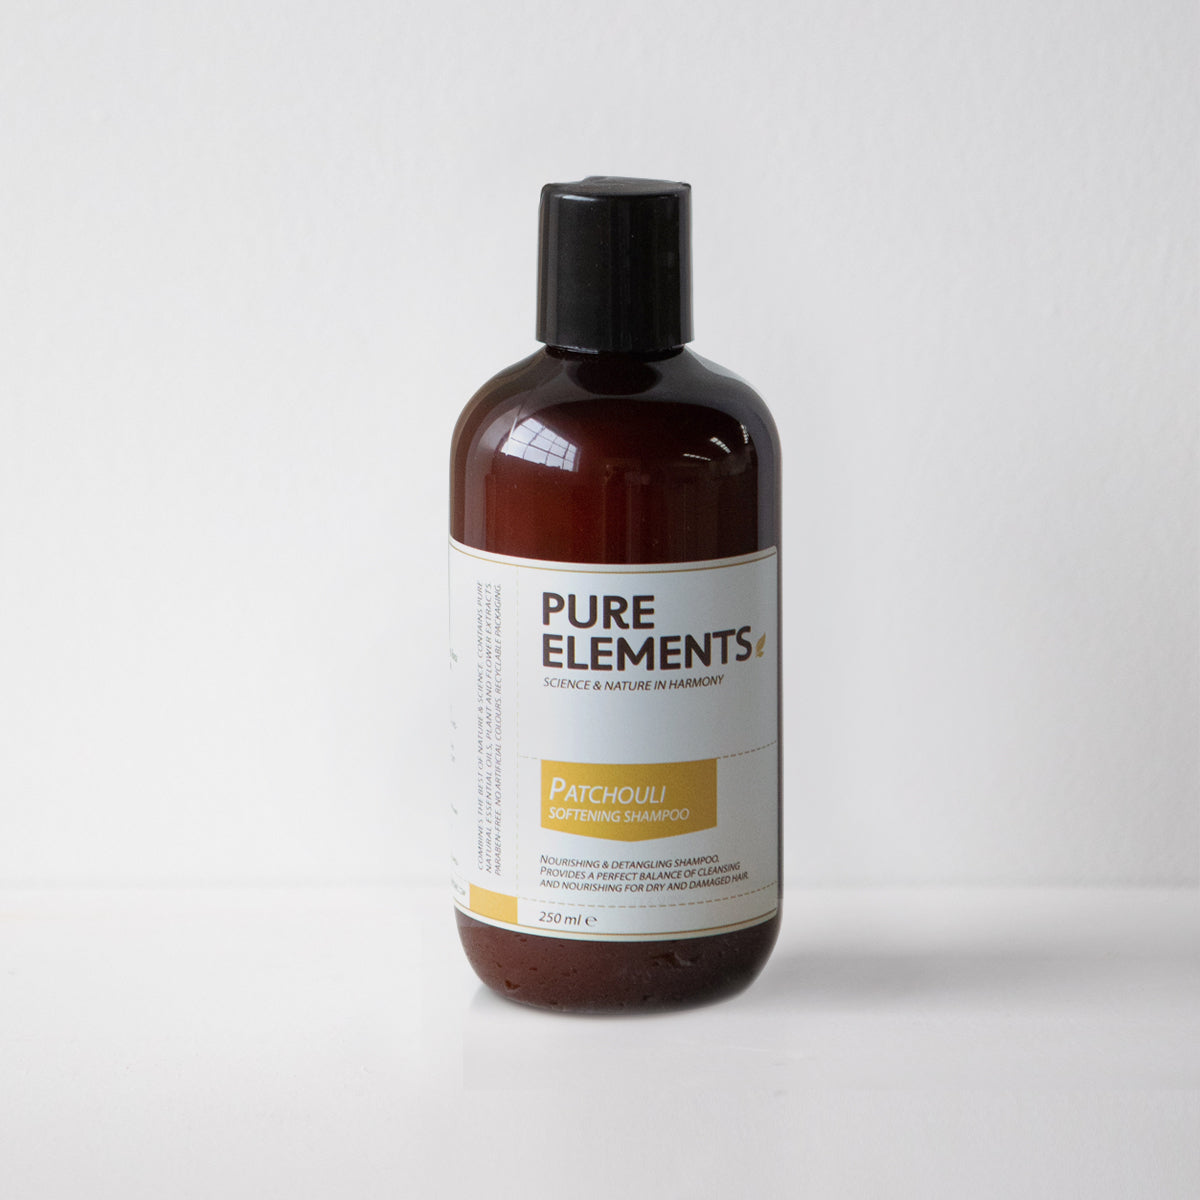 Nourishes and detangles dry and damaged hair Provides a perfect balance of cleansing and nourishing 100% pure essential oils of Patchouli and Eucalyptus calm and soften the hair; Pure natural extract of Date softens, soothes and nourishes the hair and scalp.1234